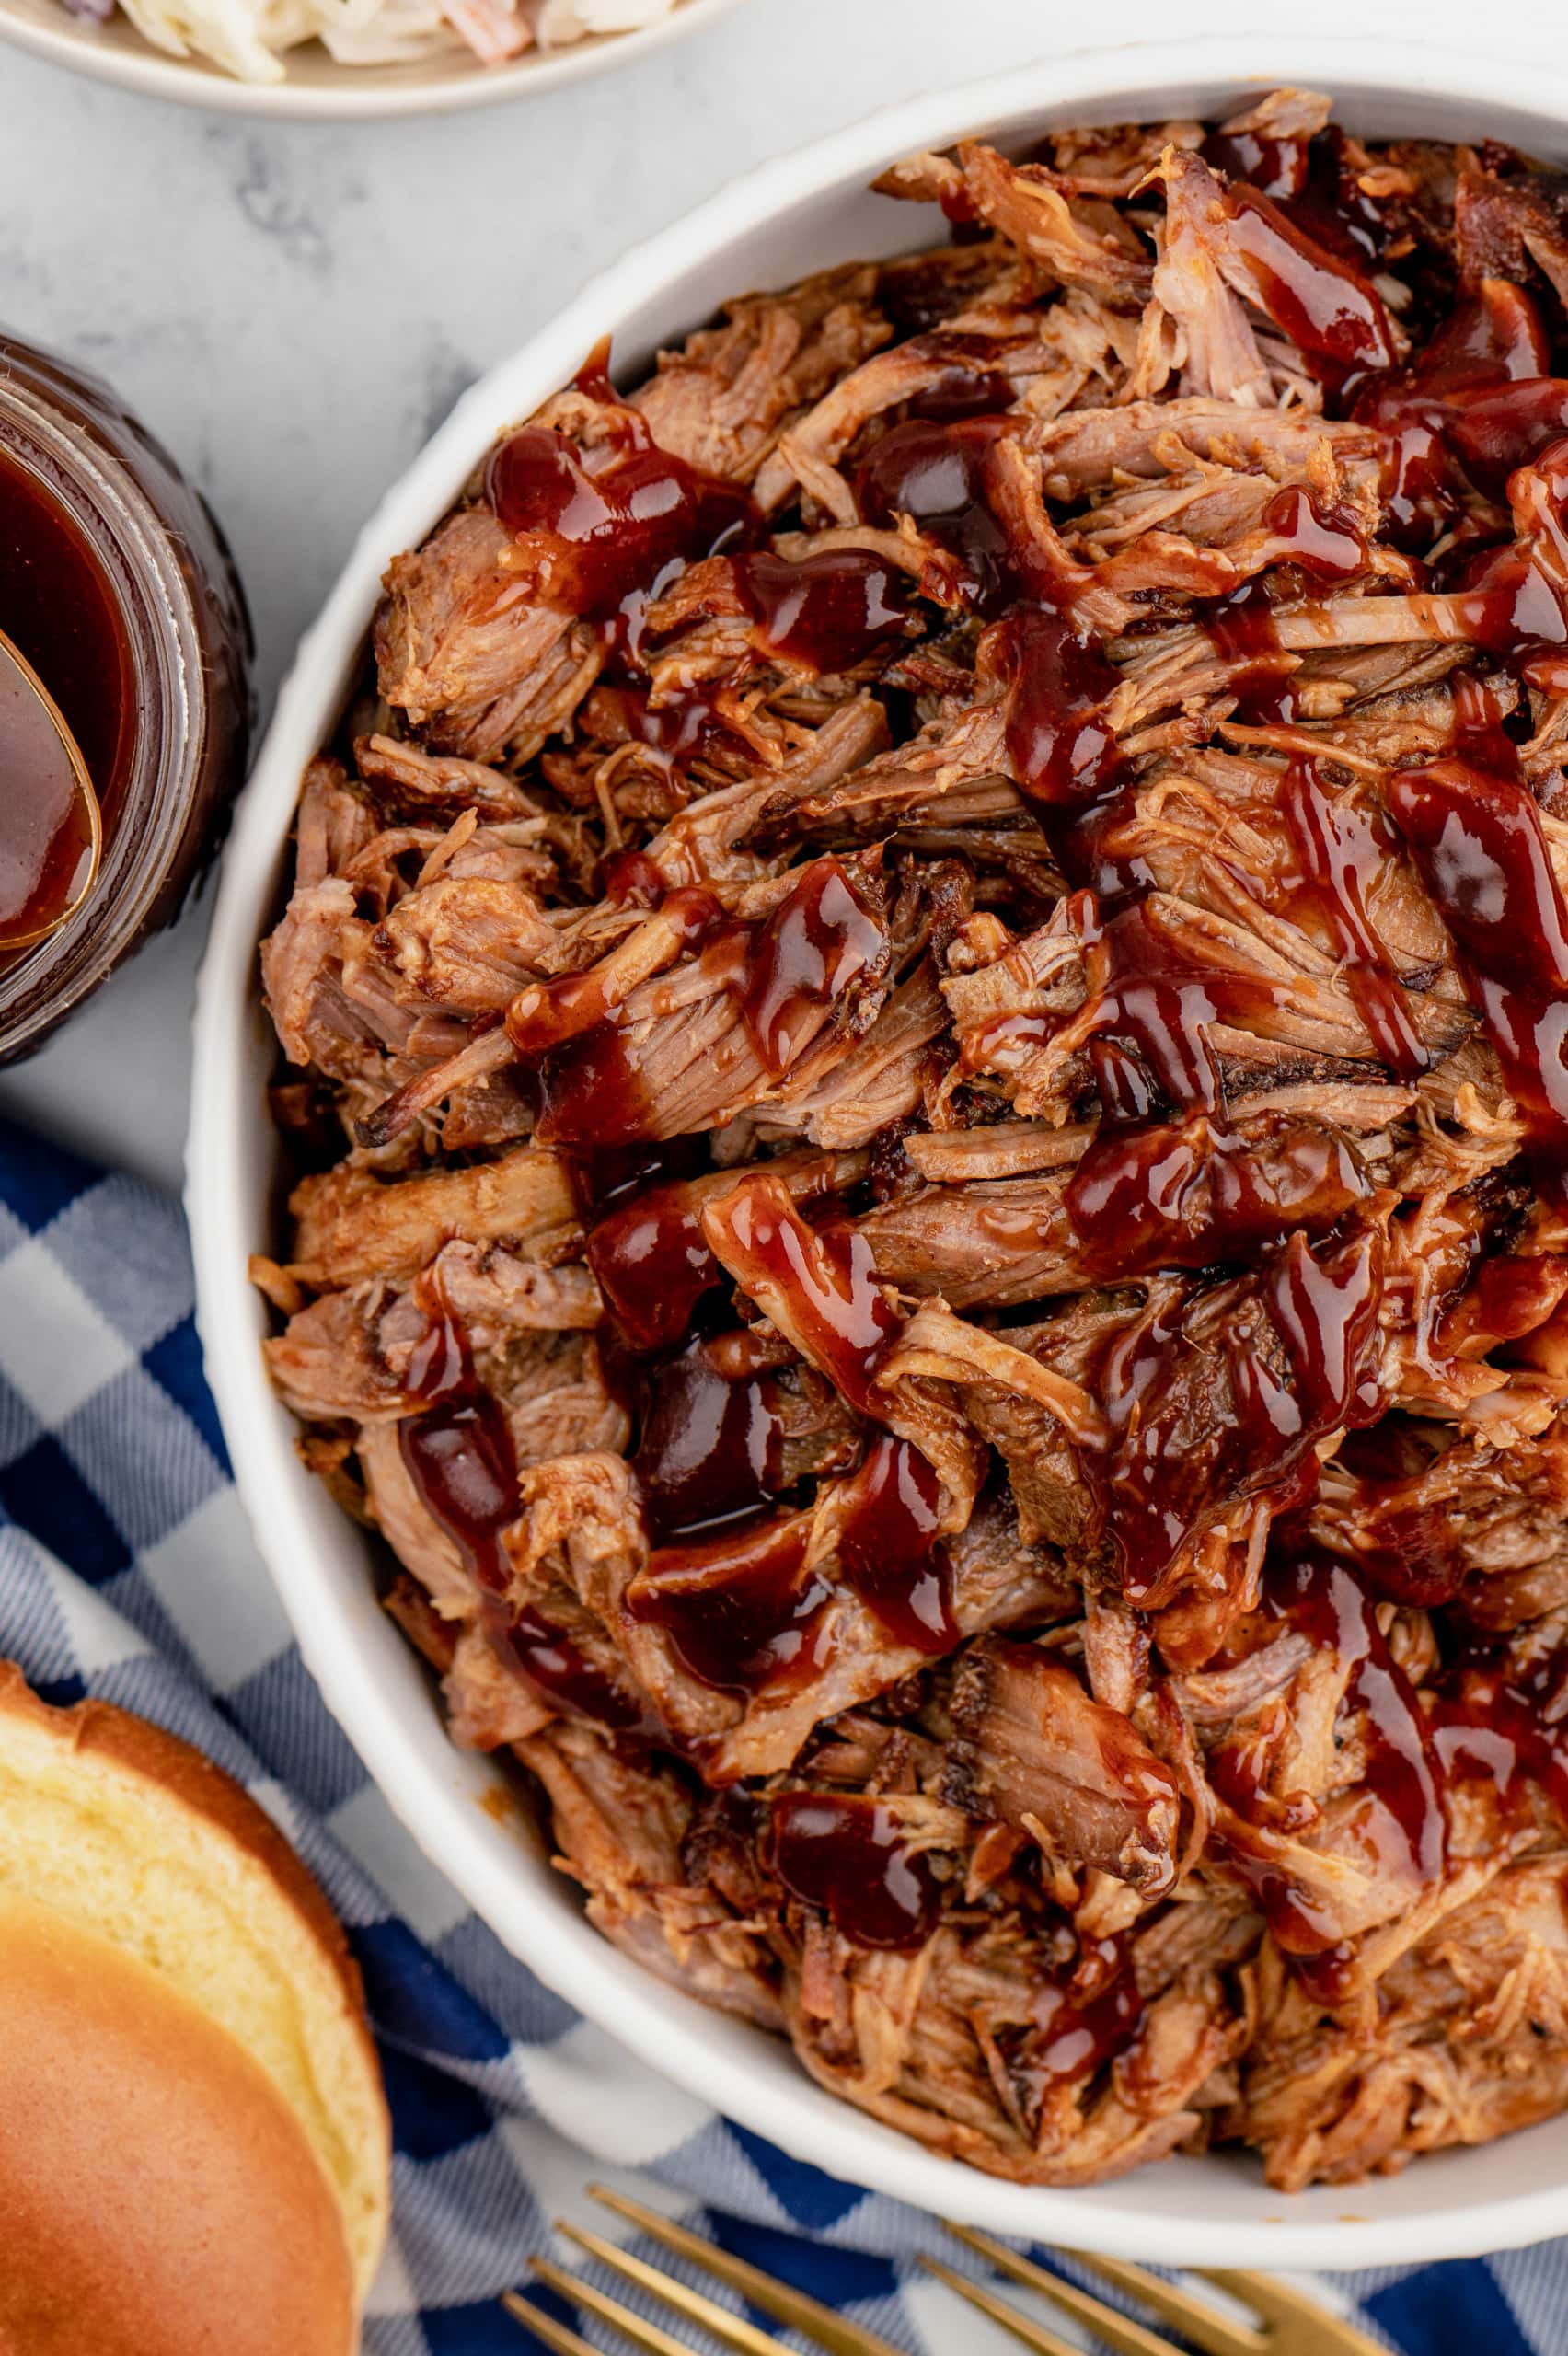 Is it possible to use the slow cook yogurt setting on here for anything  other than yogurt? (Pulled pork) : r/NinjaFoodi